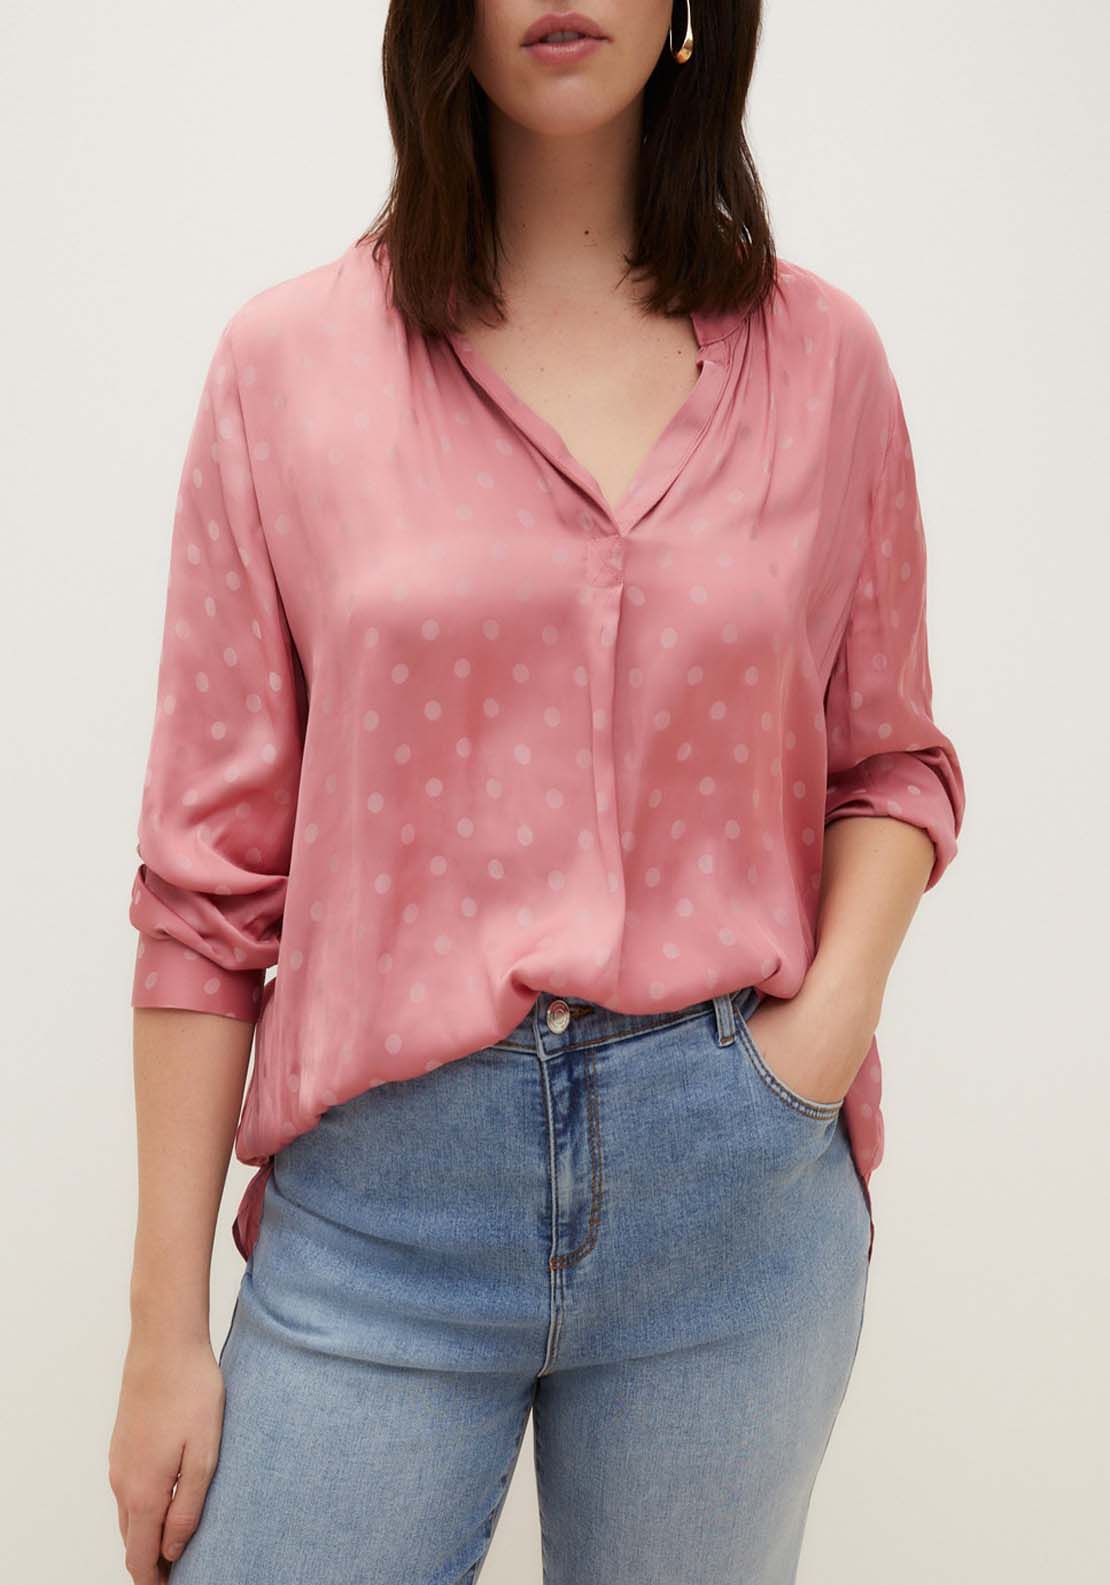 Couchel Polka Dot Blouse - Pink 1 Shaws Department Stores